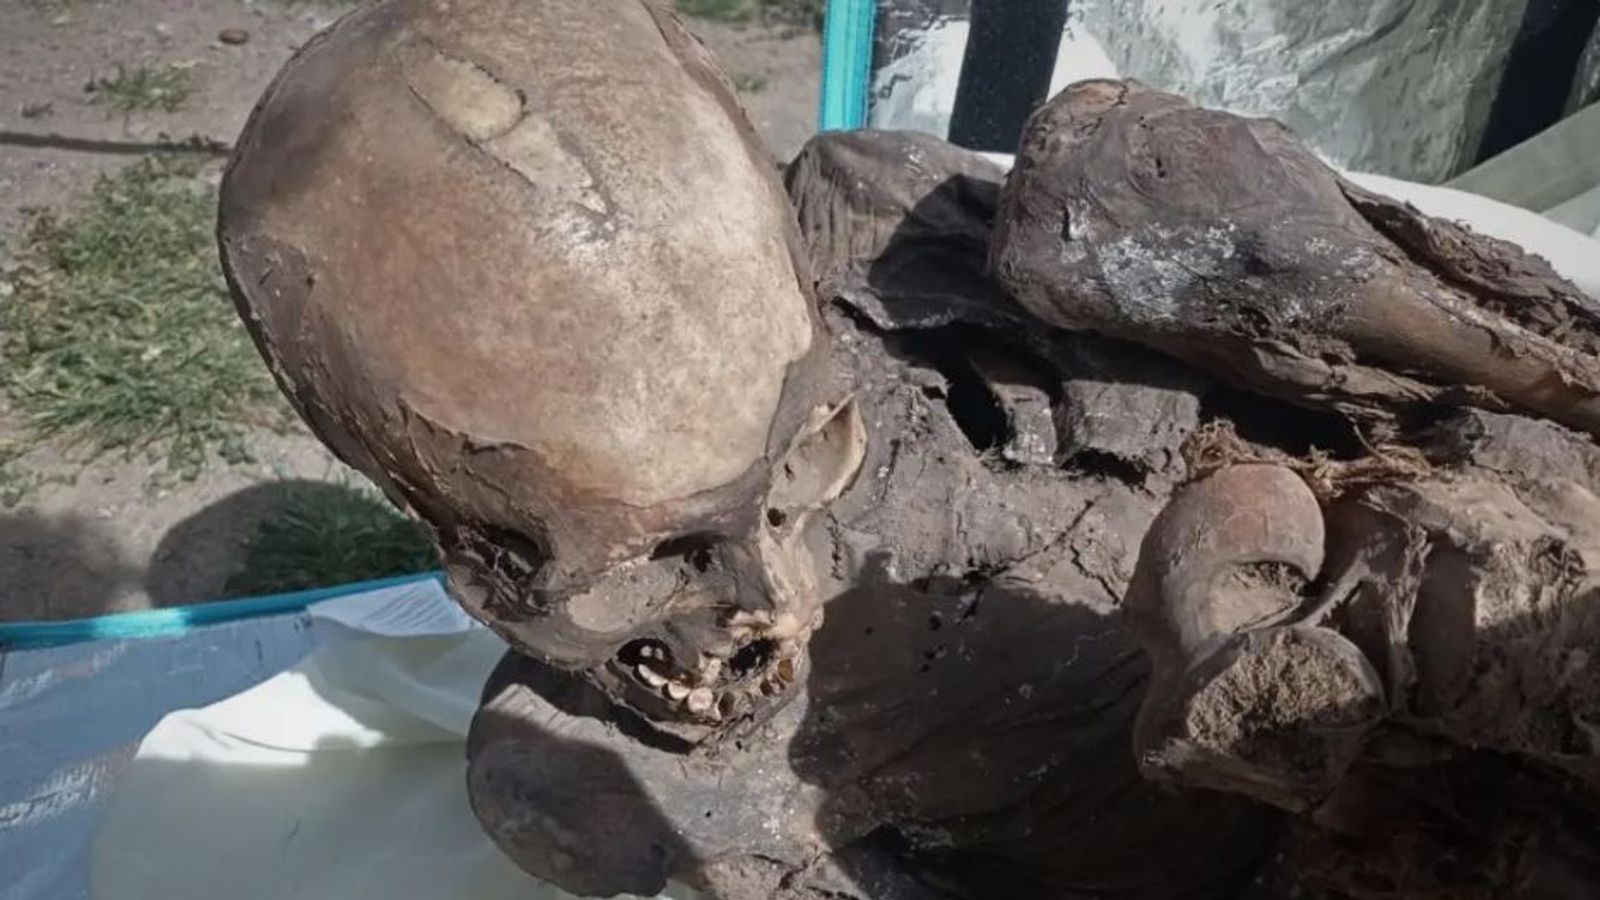 Mummy discovered in delivery driver's cooler bag in Peru